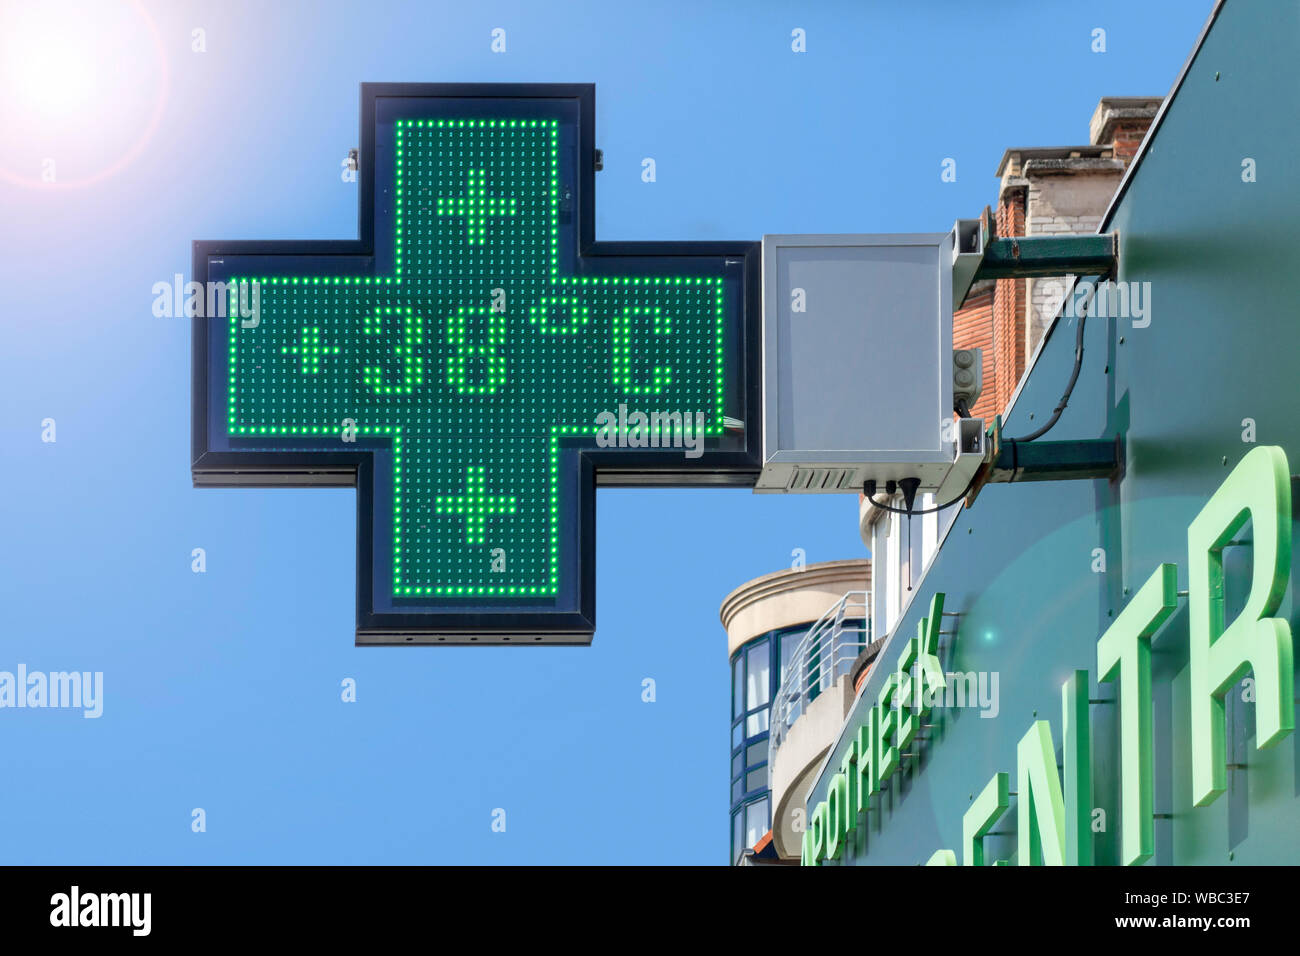 Thermometer in green pharmacy screen sign displays extremely hot temperature of 38 degrees Celsius during heatwave / heat wave in summer in Belgium Stock Photo